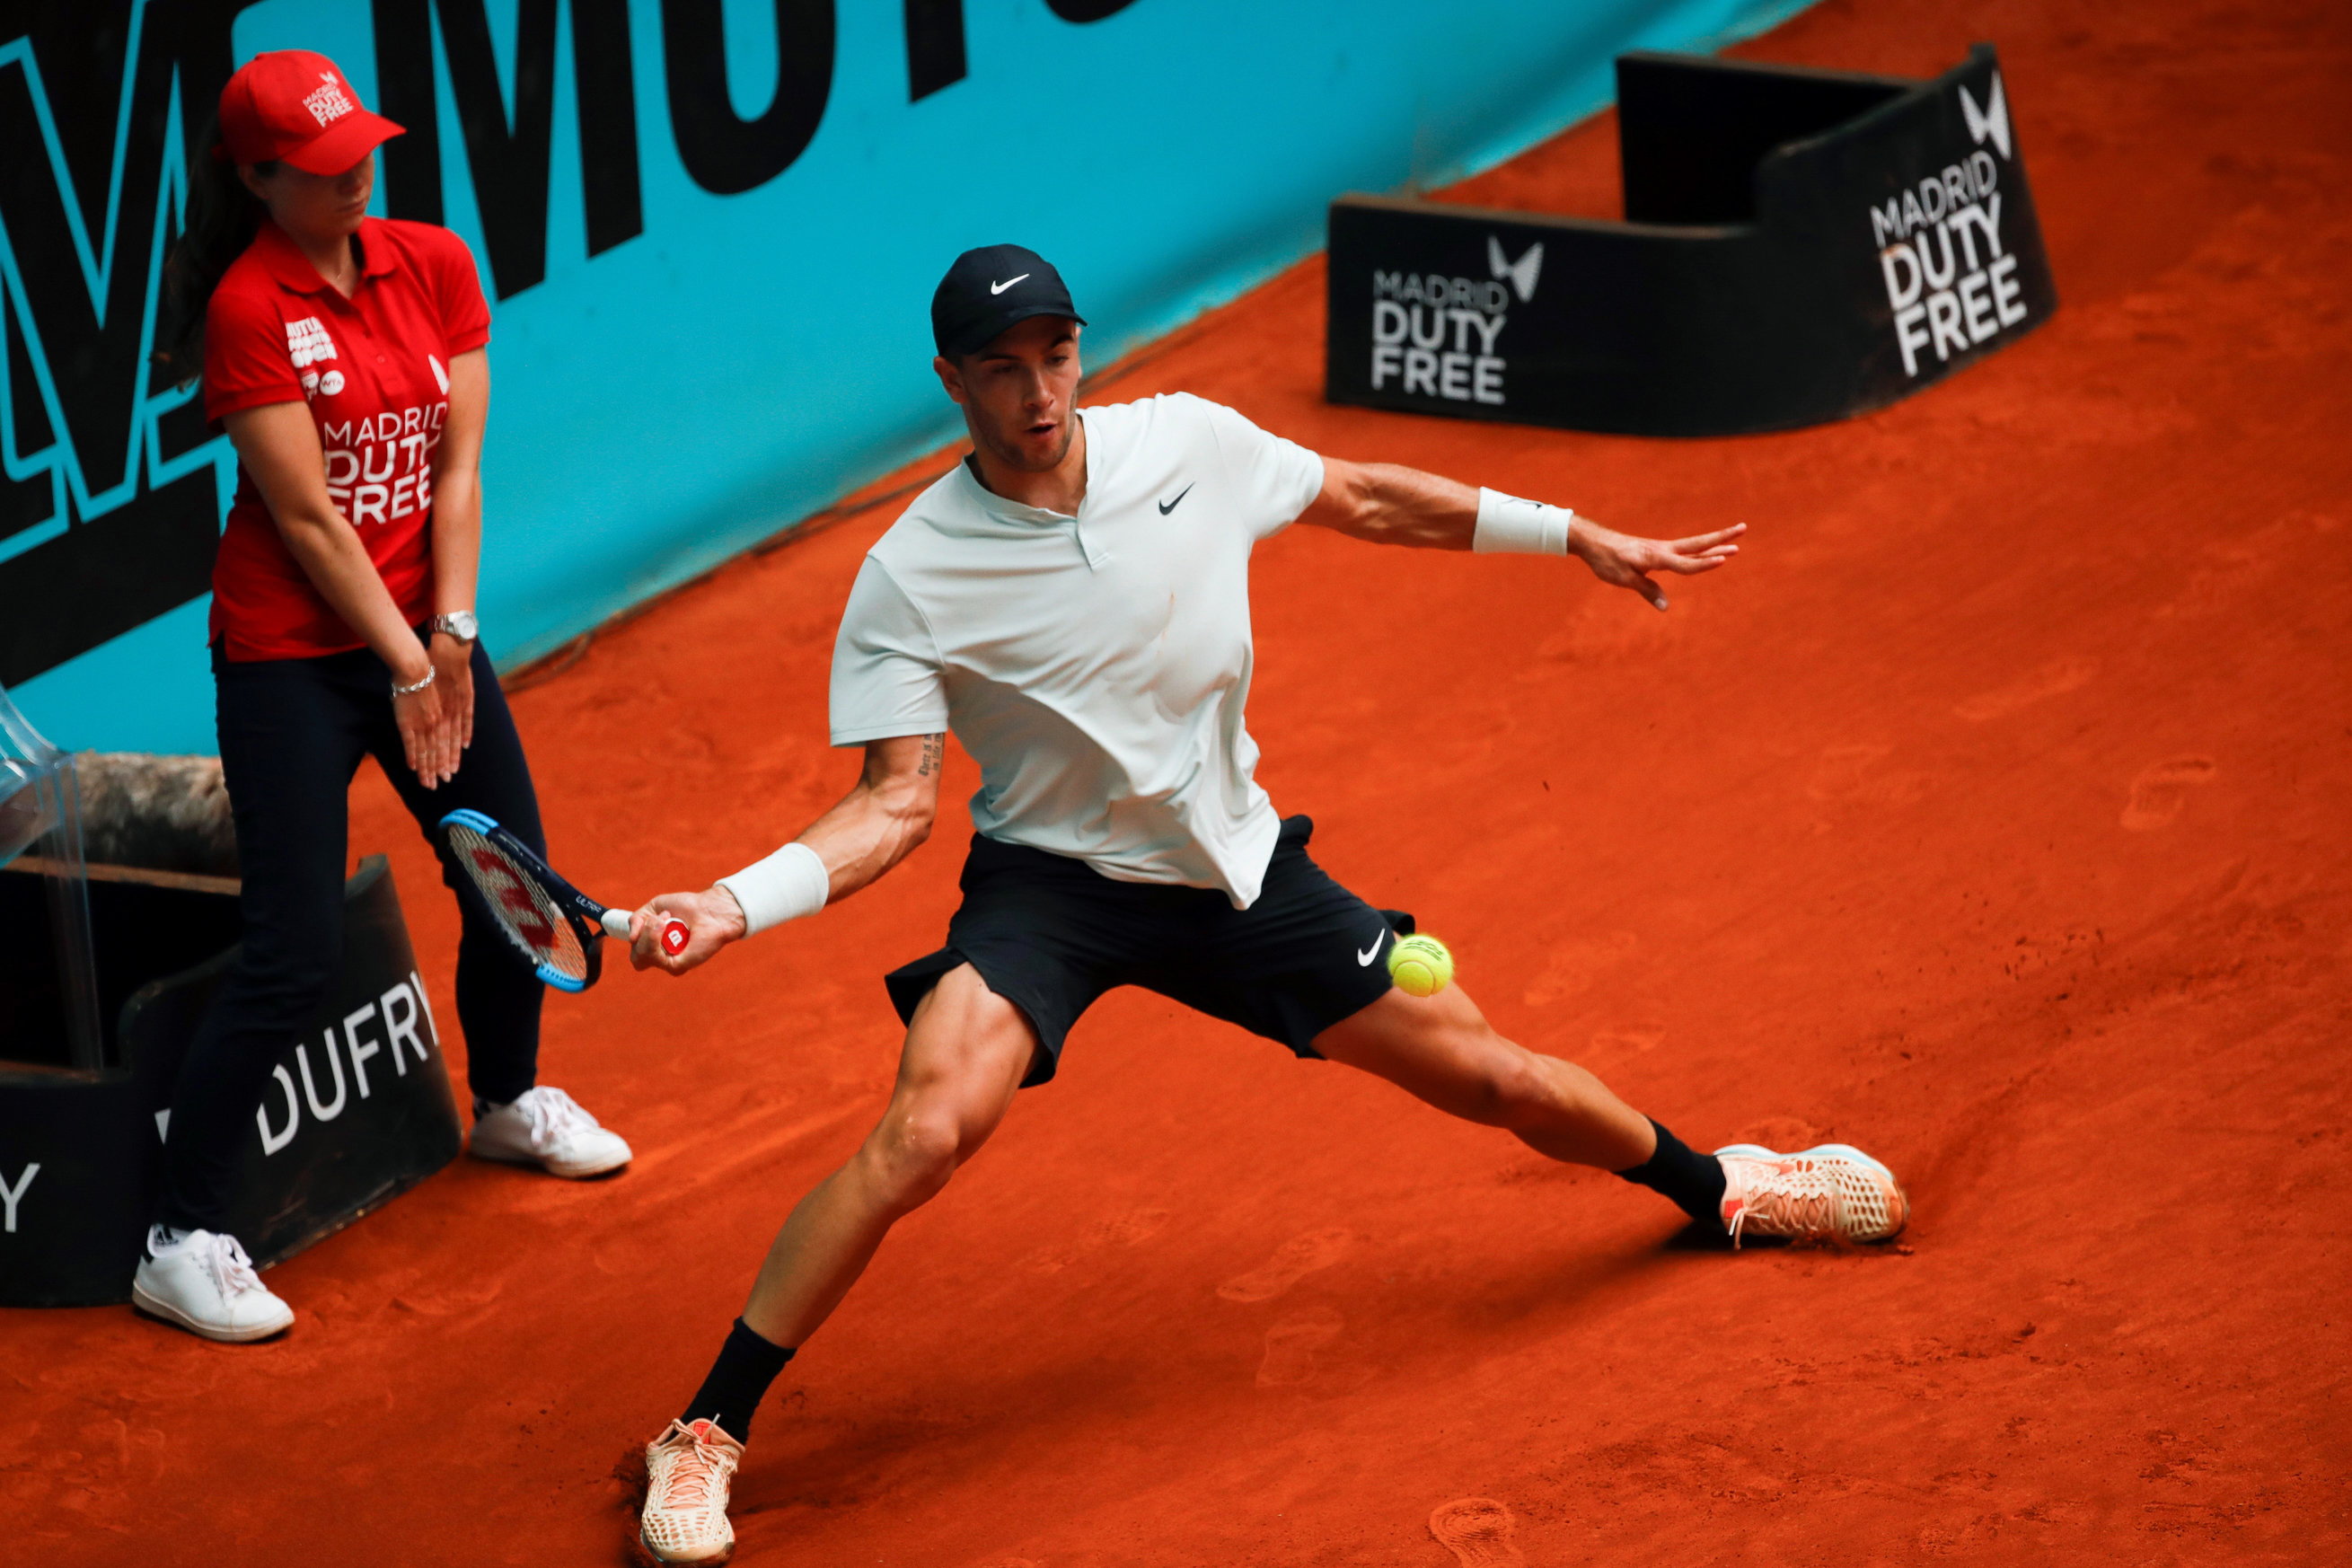 epa06719348 Croatia's Borna Coric in action during his men's singles first round match against Spanish player Pablo Carreno at the 2018 Mutua Madrid Open tennis tournament in Madrid, Spain, 08 May 2018.  EPA/JUANJO MARTIN